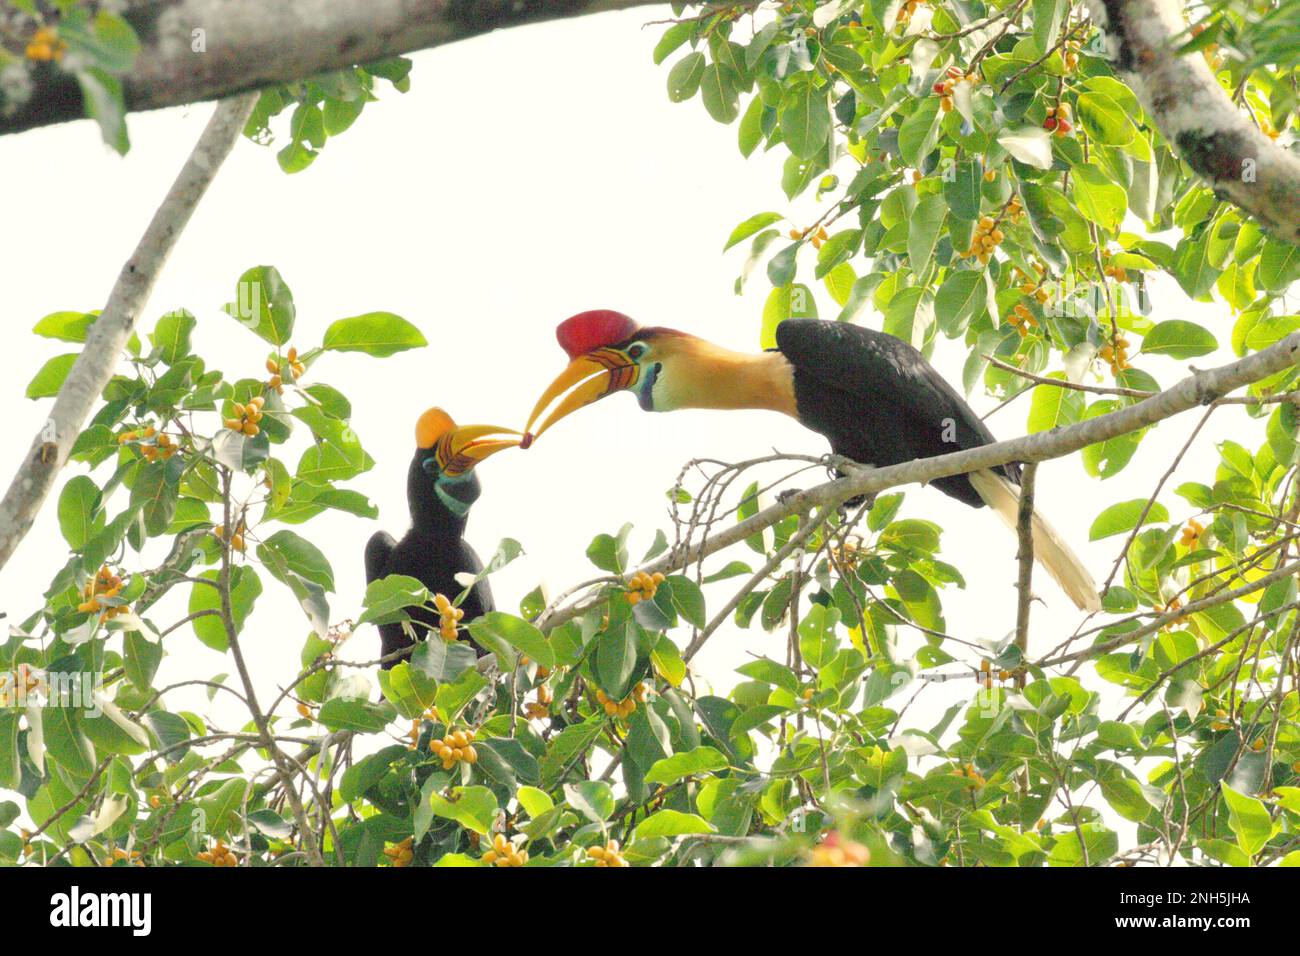 A male individual of knobbed hornbill, or sometimes called Sulawesi wrinkled hornbill (Rhyticeros cassidix), feeds a female individual with a ficus fruit as they are foraging on a fig tree in a rainforest area near Mount Tangkoko and DuaSudara in Bitung, North Sulawesi, Indonesia. 'Hornbills are diurnal species that mostly travel in pairs and remain monogamous,' wrote Amanda Hackett of Wildlife Conservation Society in a 2022 publication. Play an important role in seed dispersal—often dubbed as forest farmer by ornithologists, hornbills 'keep the cycle of the forest growing and evolving.' Stock Photo